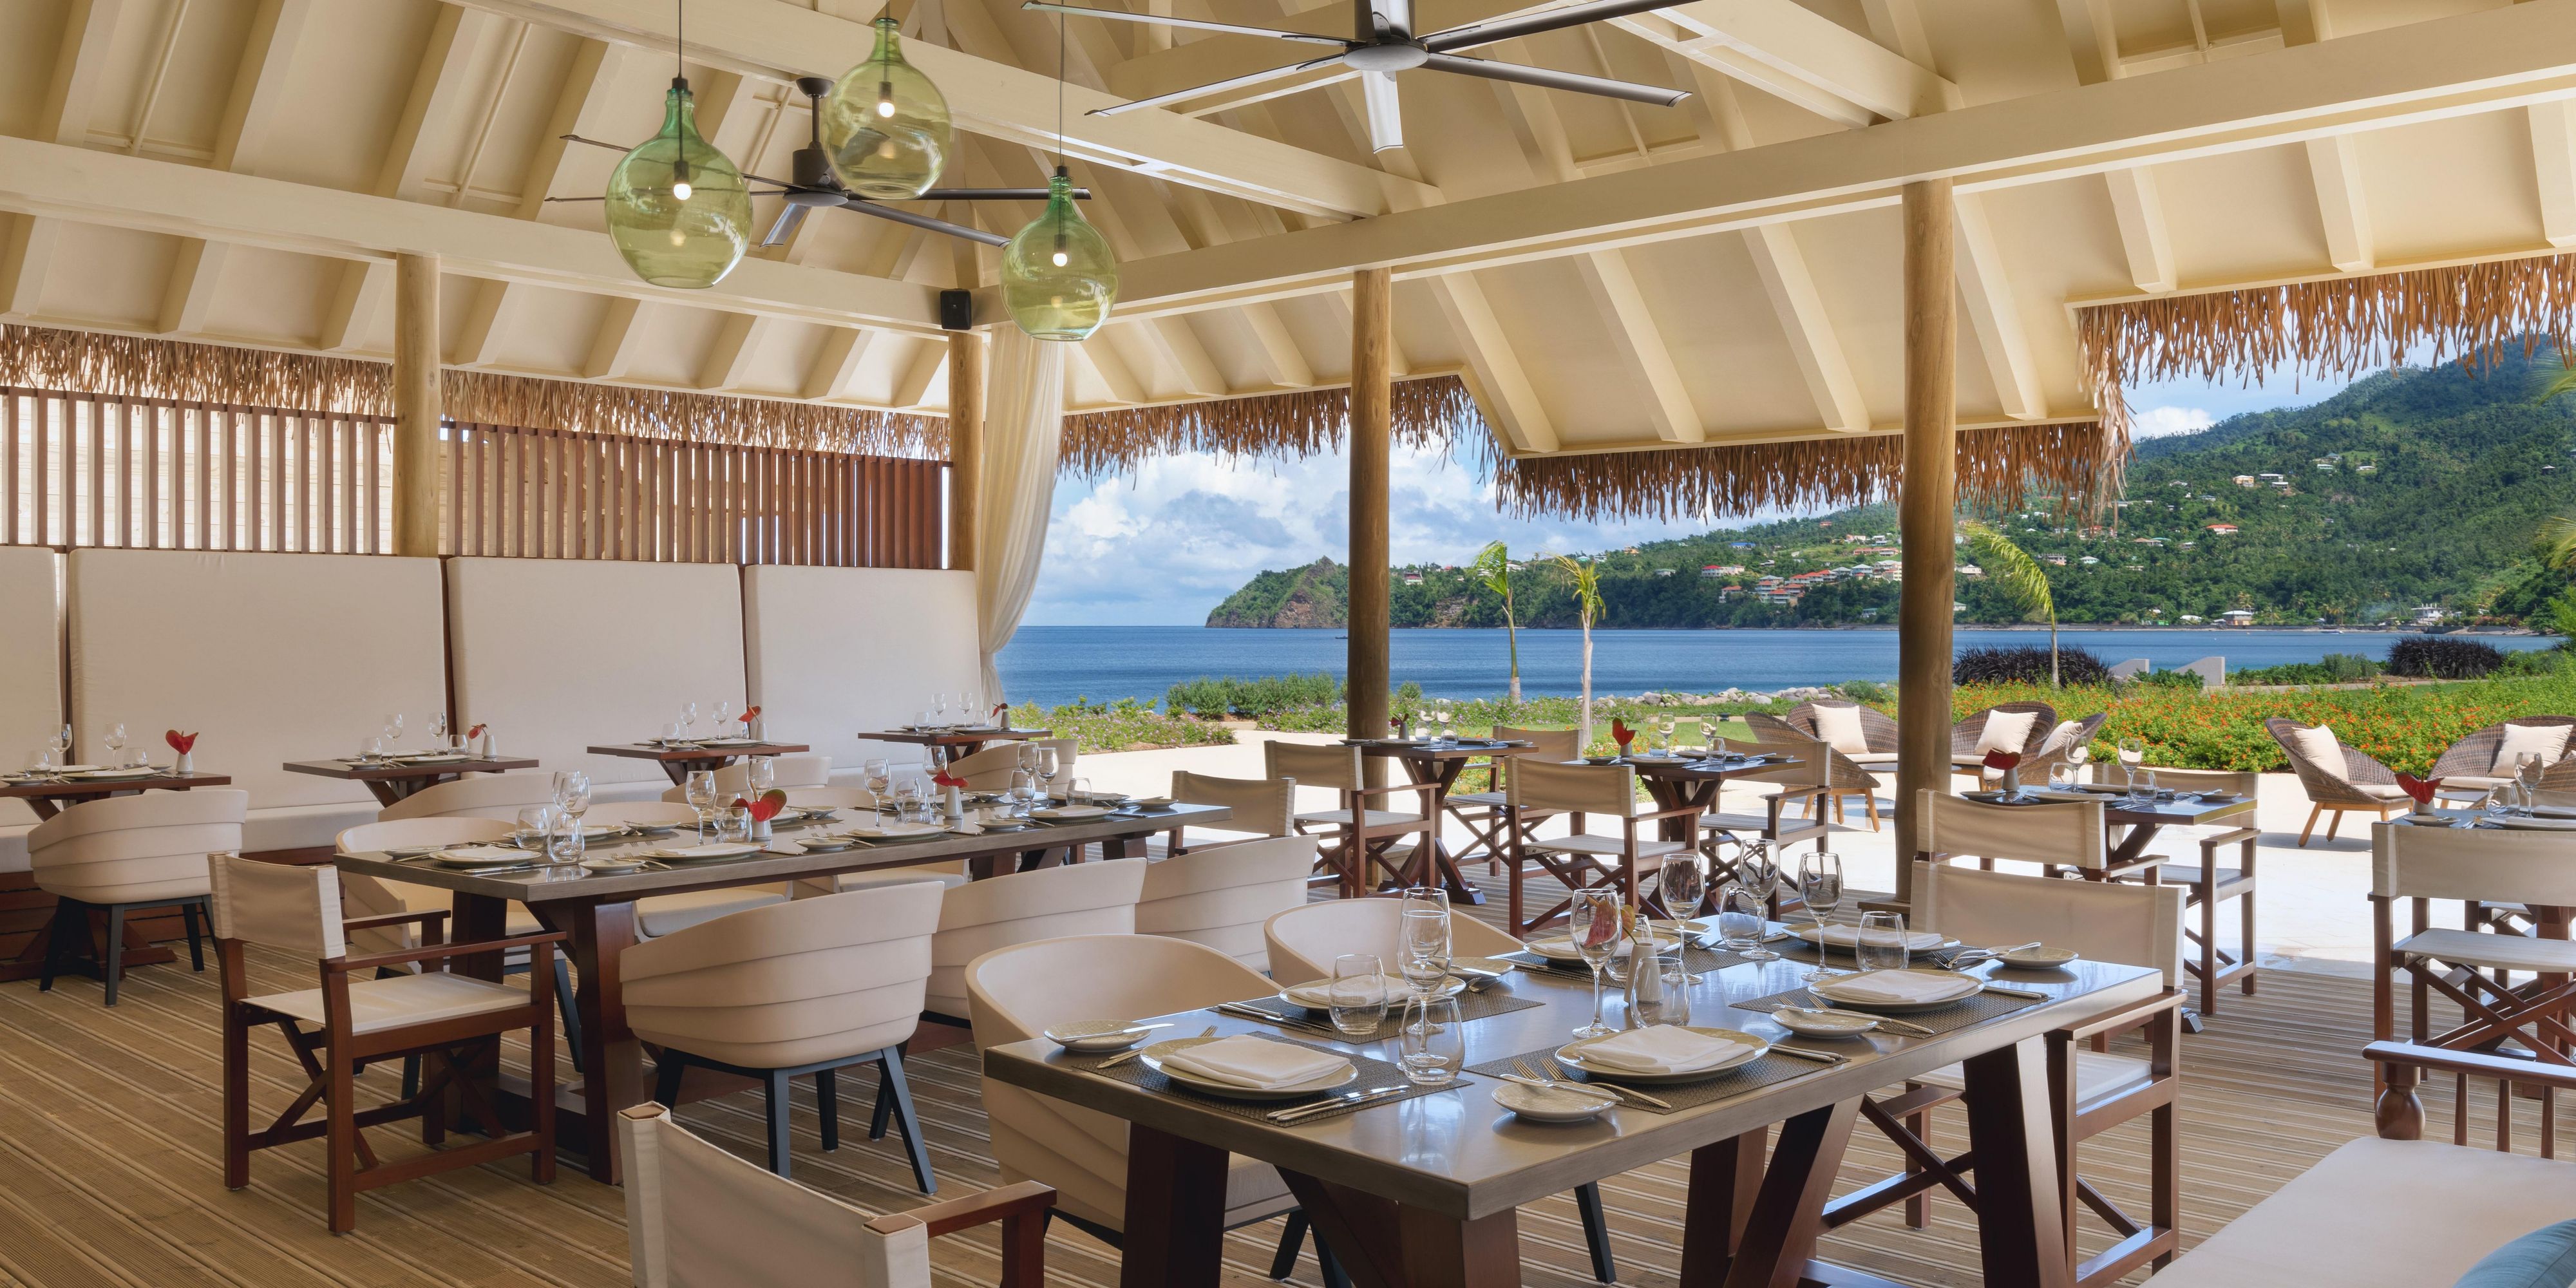 Dine al fresco and savor creative, local fare at our restaurants and bars. Enjoy a breakfast buffet at Cabrits Market or a laid-back lunch at Kwéyòl Beach Café. Visit our swim-up bar for drinks and snacks during your day of relaxation or sip rum cocktails infused at the Rumfire Bar.